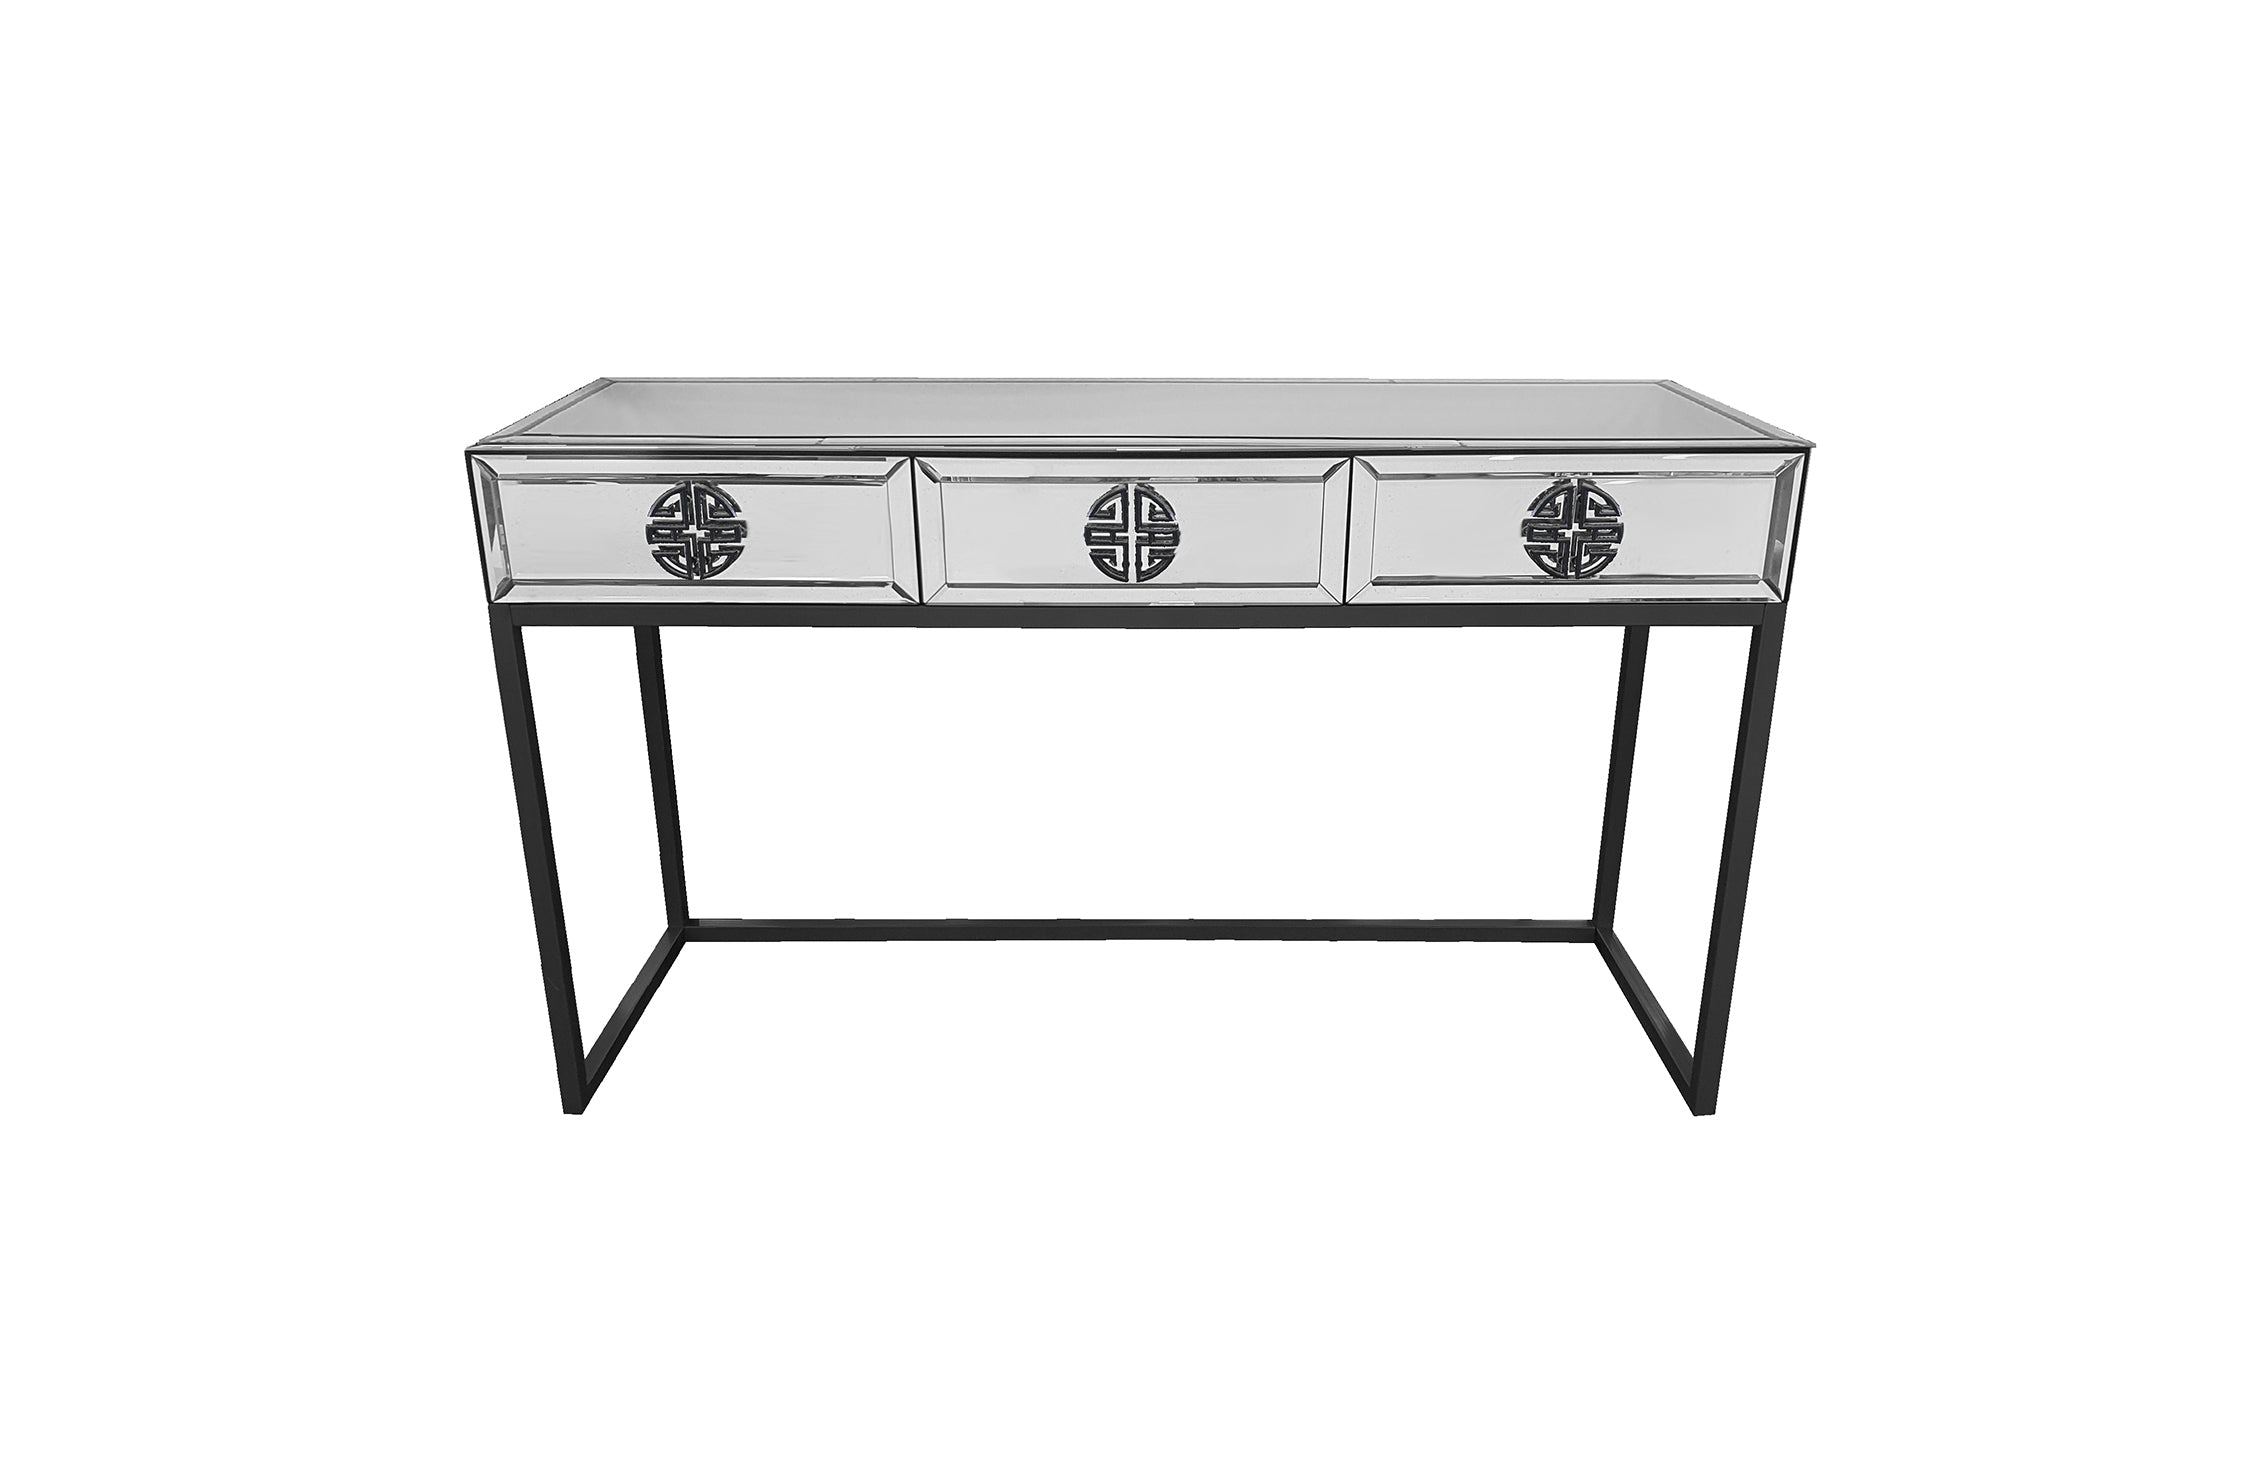 Athens Mirrored Console Table -Black